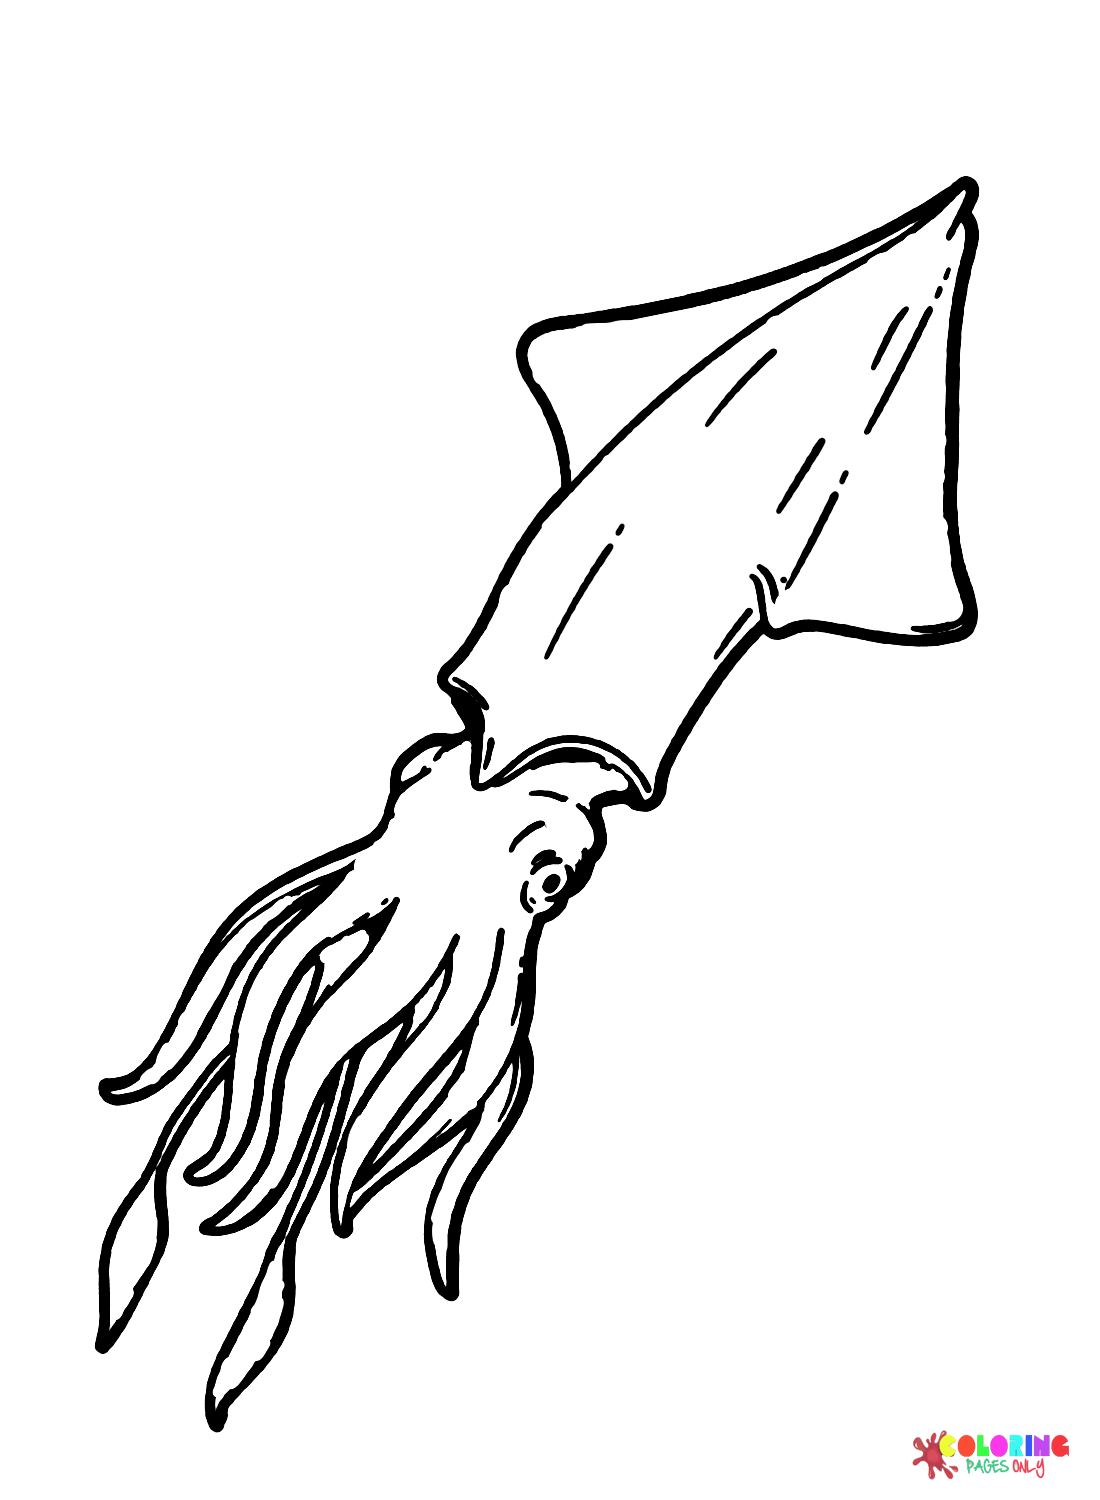 Cuttlefish to Print Coloring Page